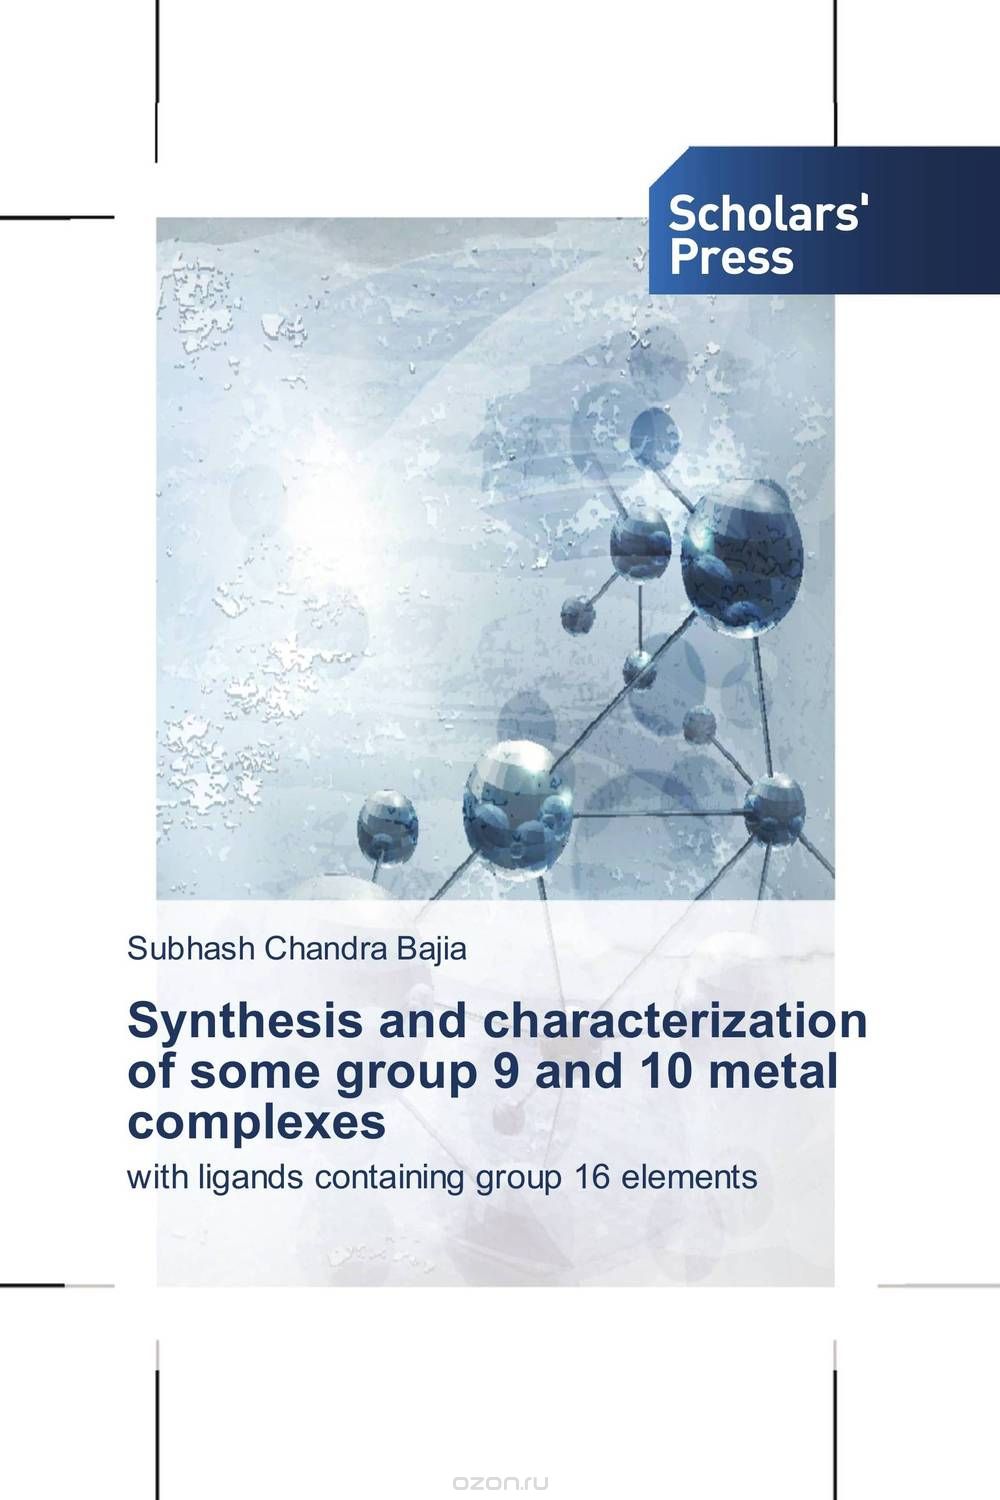 Скачать книгу "Synthesis and characterization of some group 9 and 10 metal complexes"